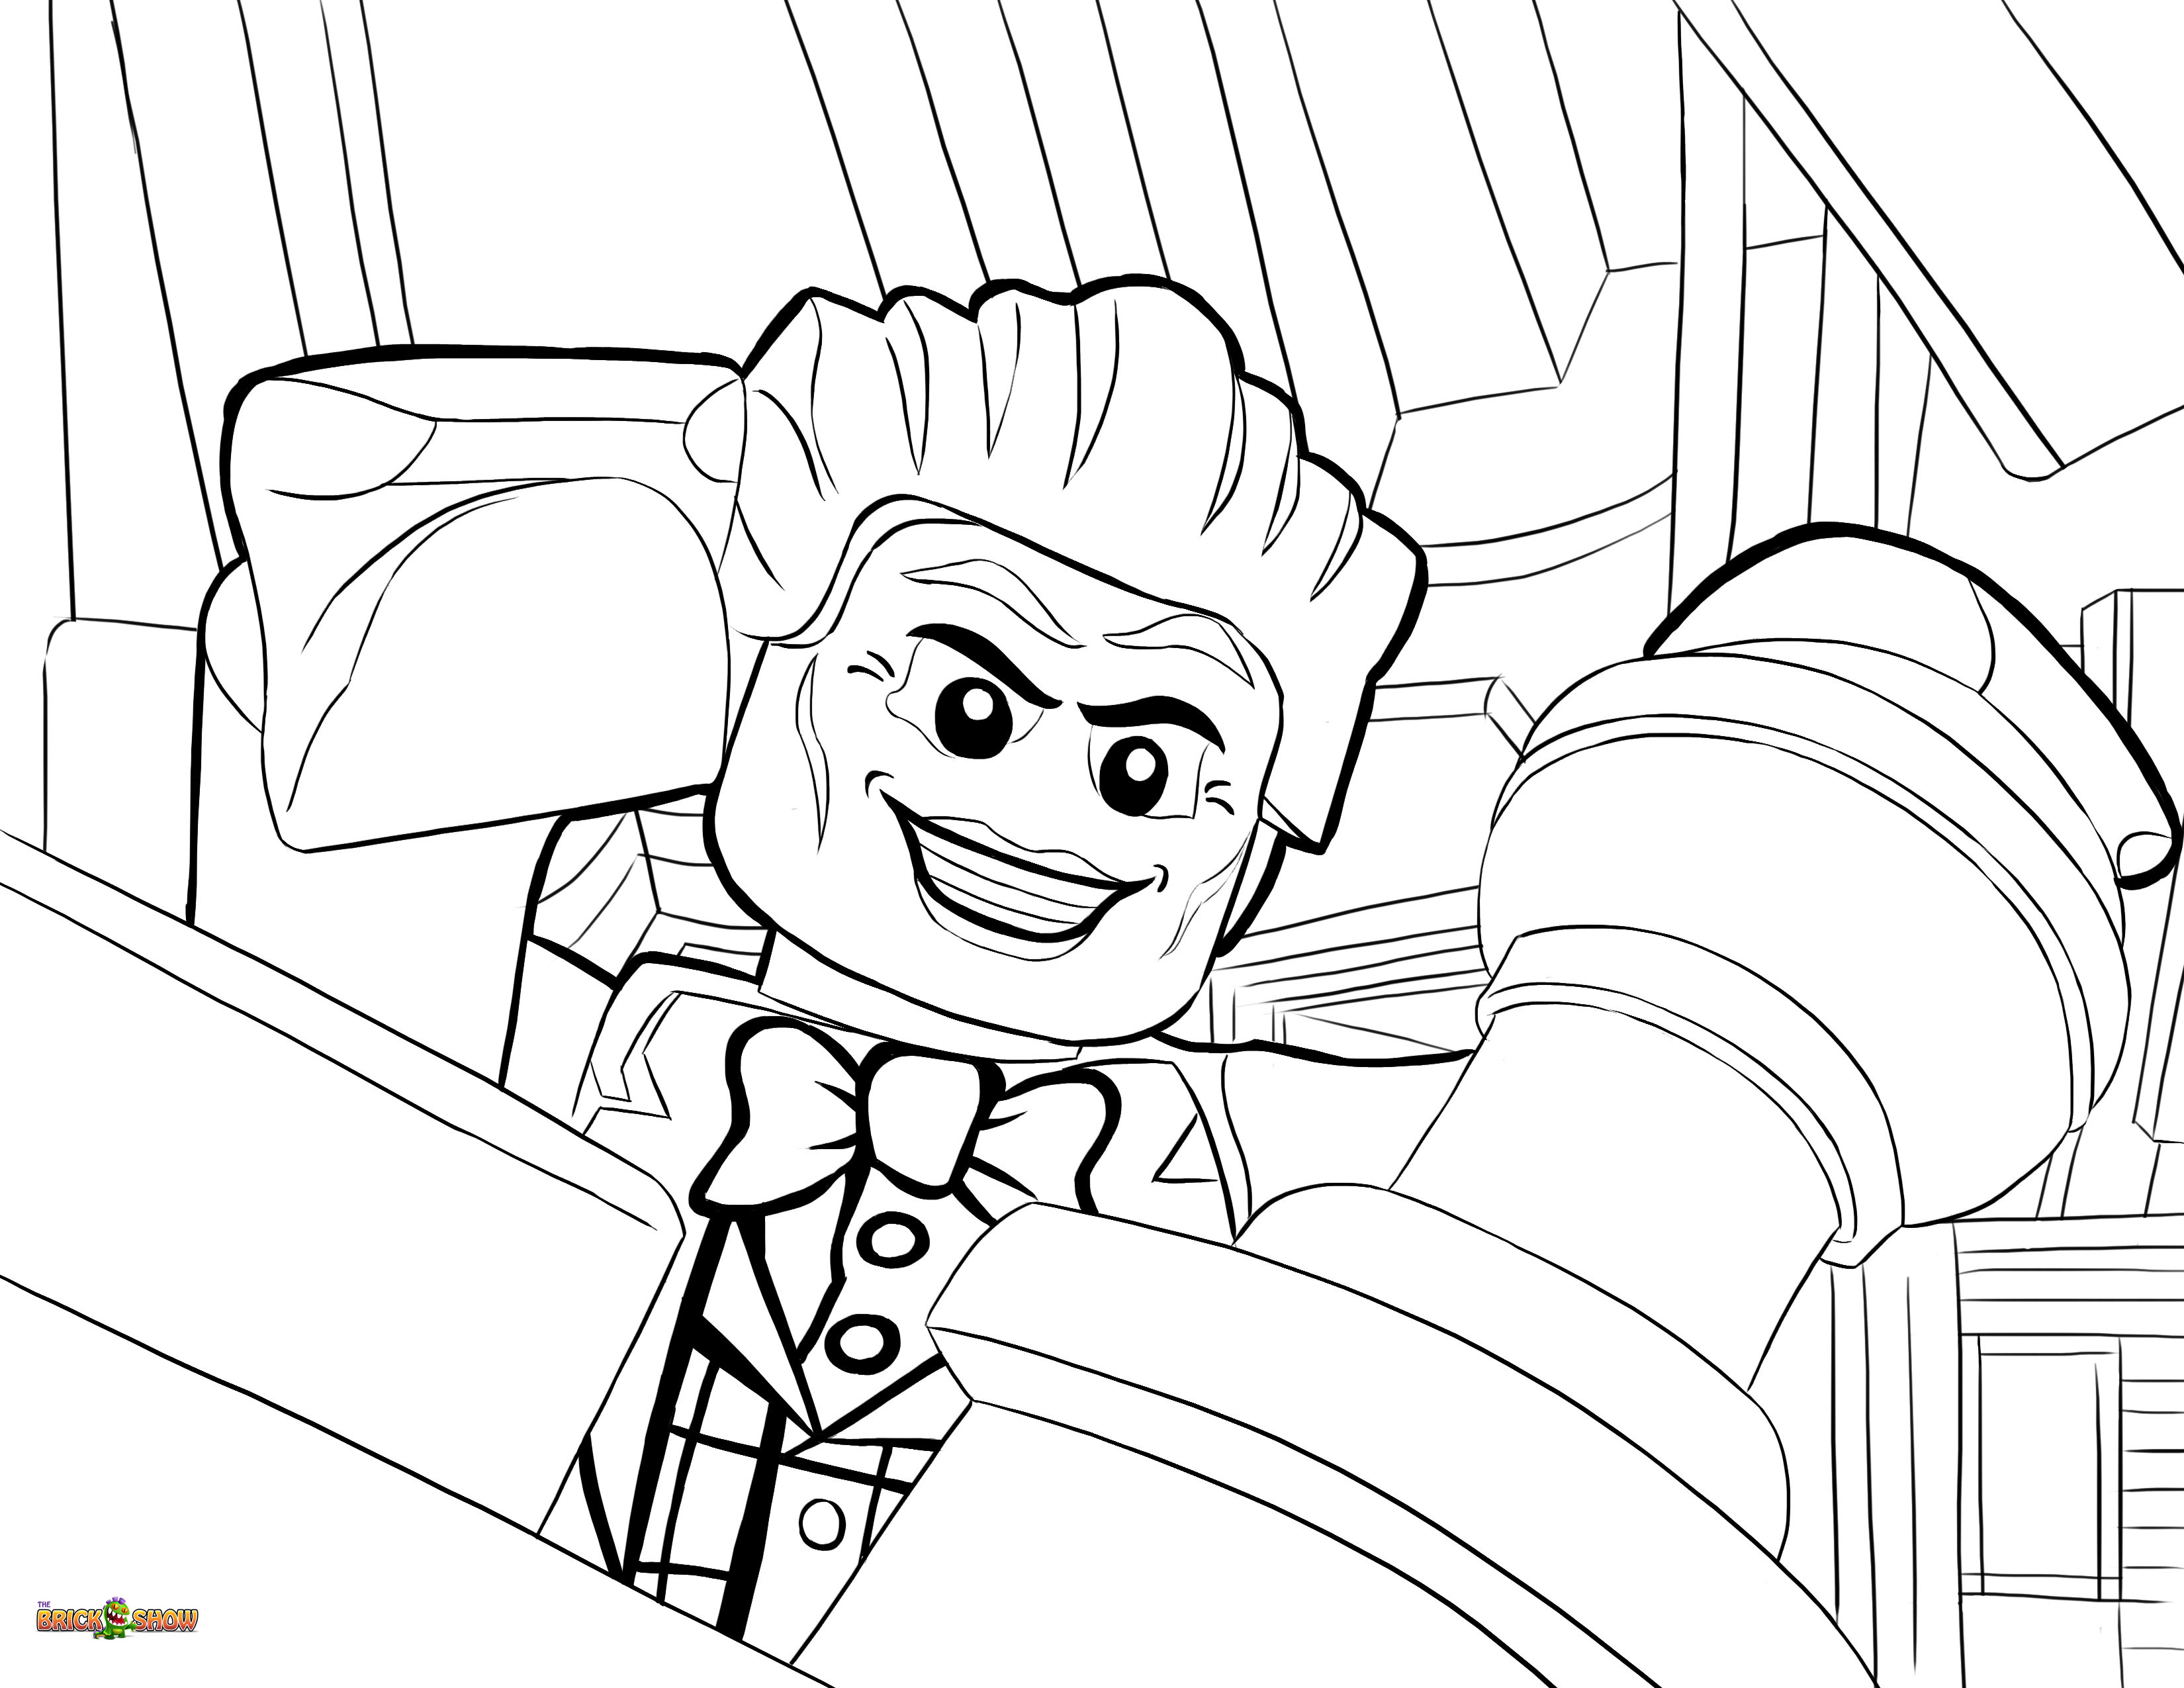 Dc superhero coloring pages download and print for free